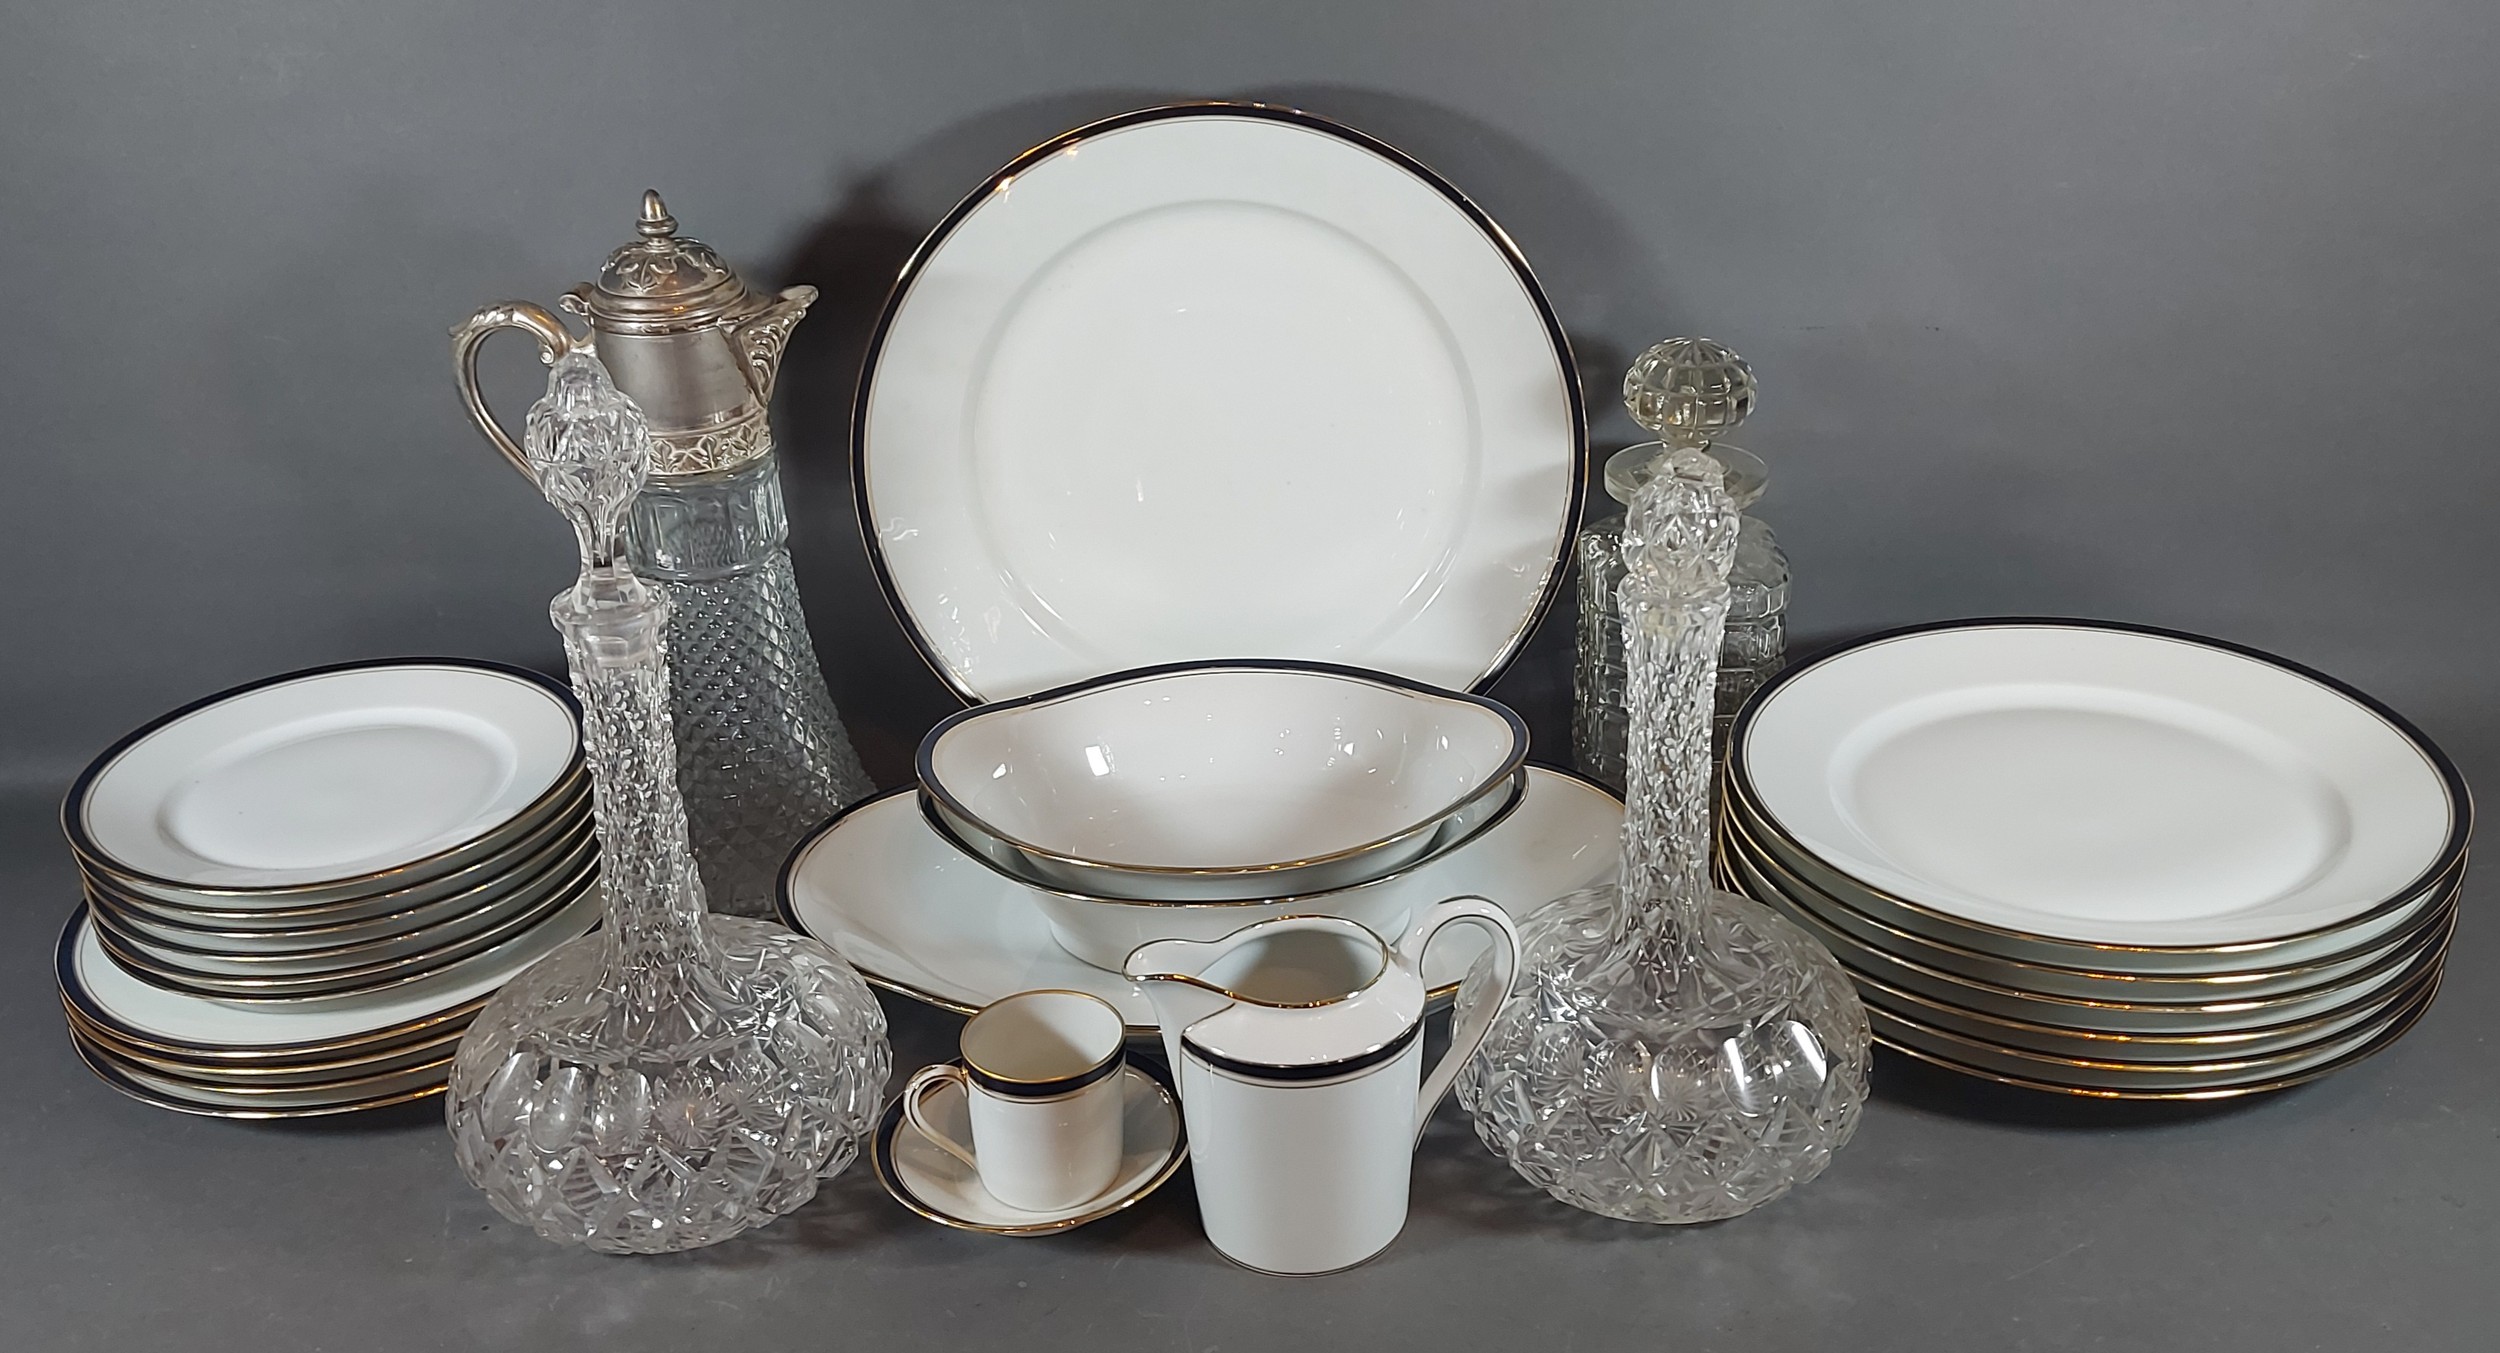 A Limoges porcelain dinner service together with a claret jug and three decanters